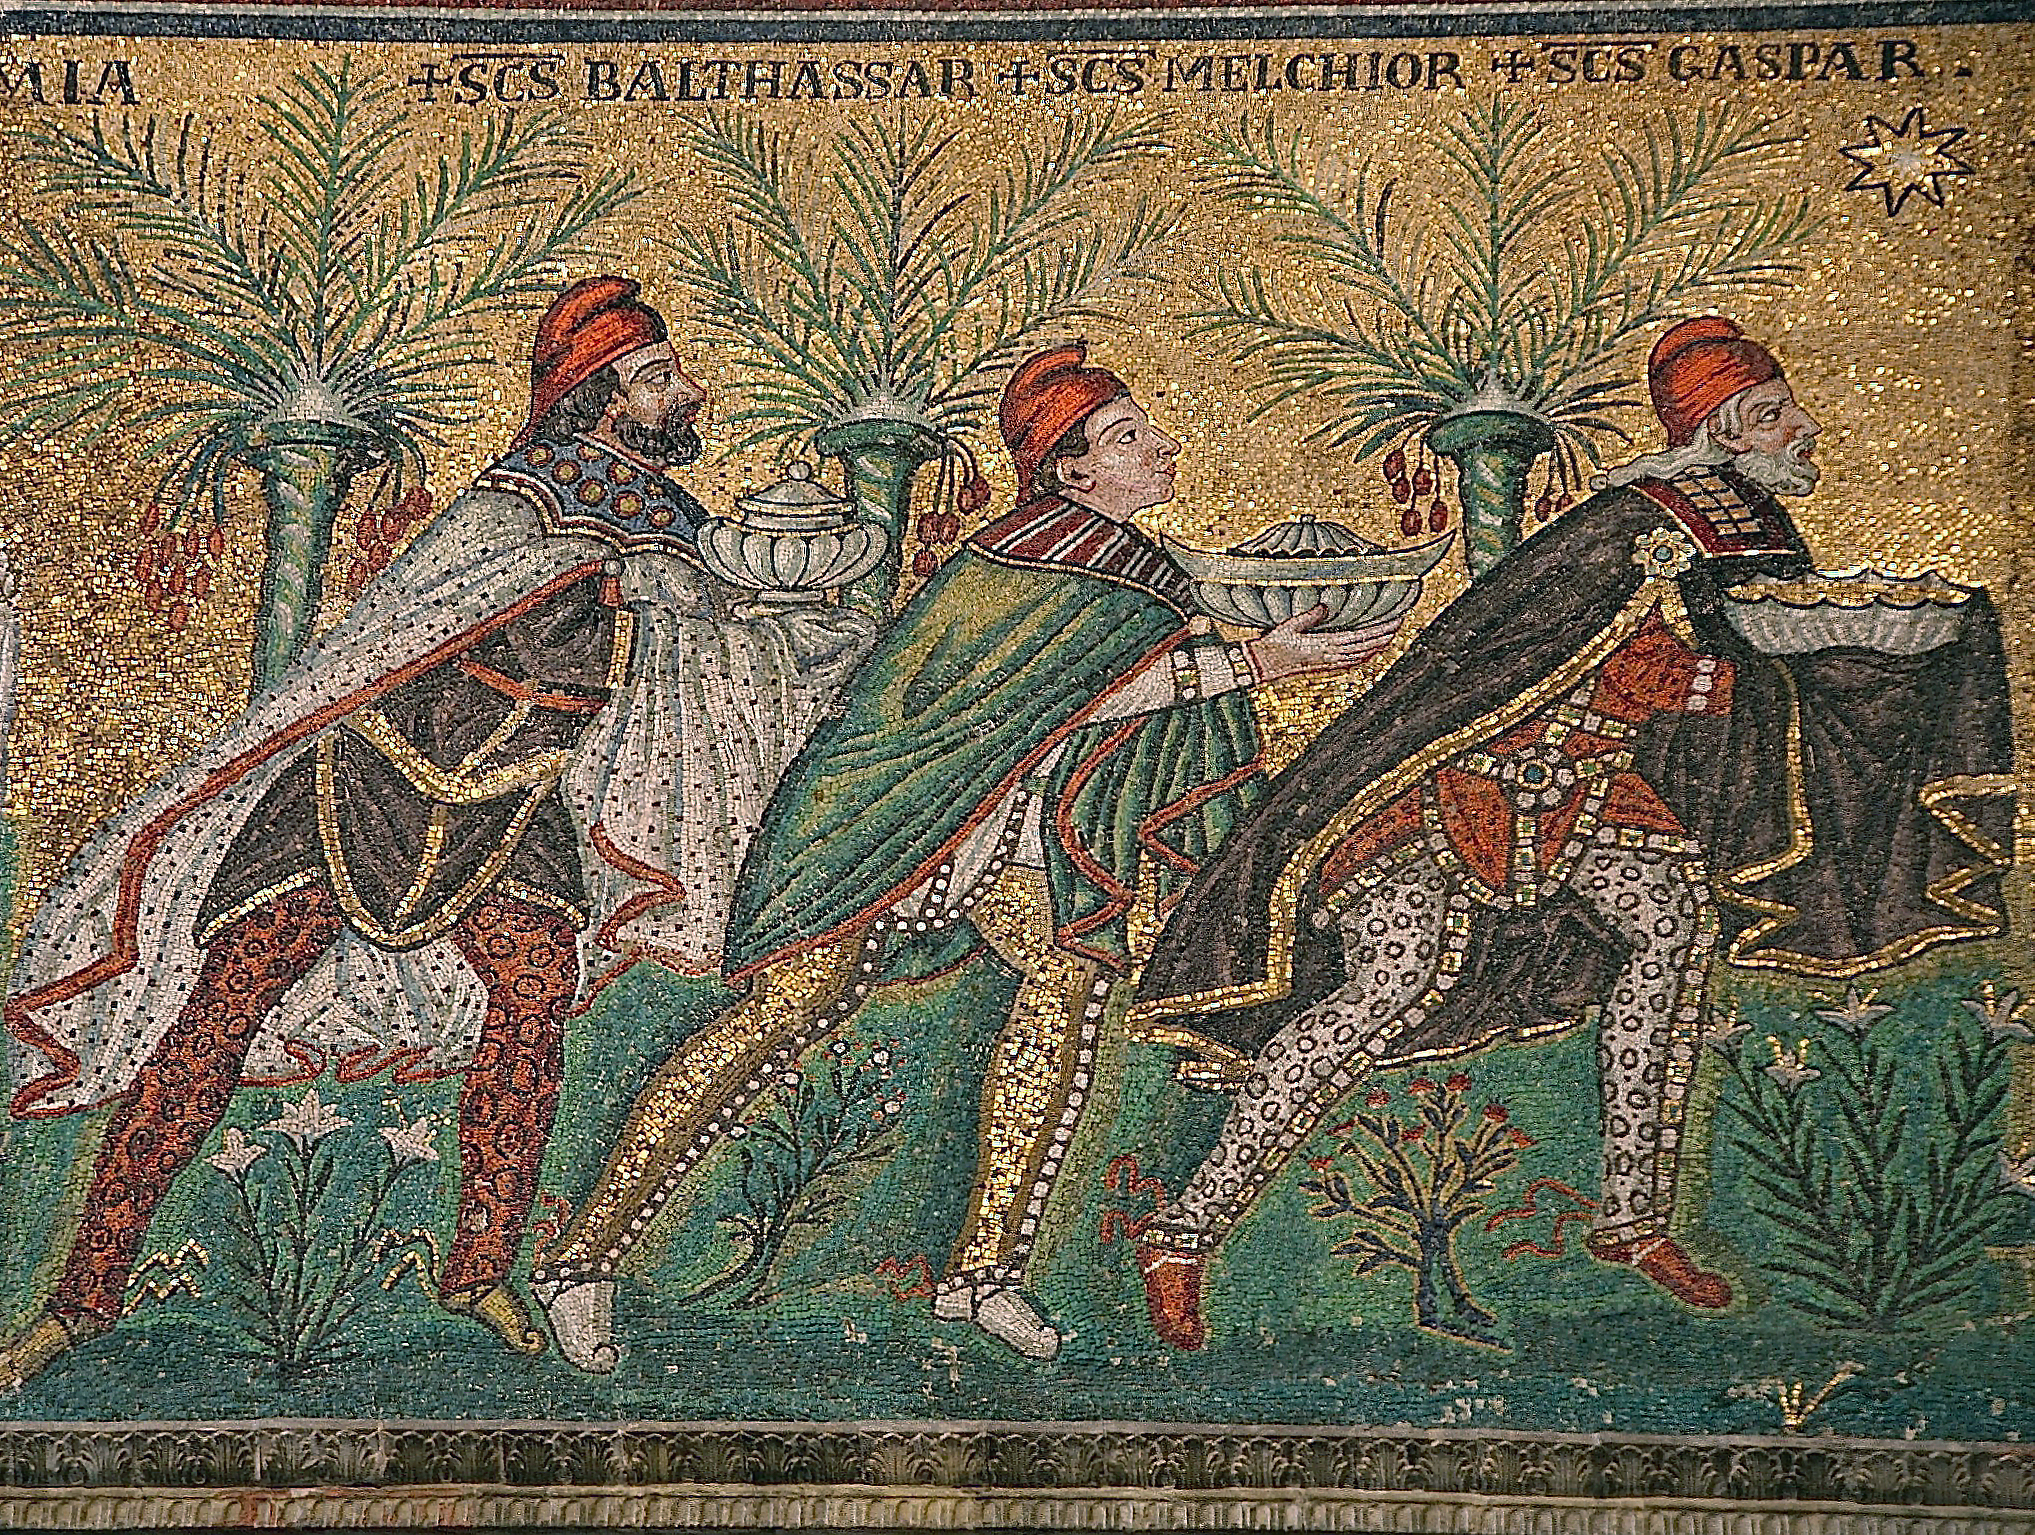 The Three Magi, Byzantine mosaic c. 565, Basilica of Sant'Apollinare Nuovo, Ravenna, Italy (restored during the 18th century). As here Byzantine art usually depicts the Magi in Persian clothing which includes breeches, capes, and Phrygian caps.